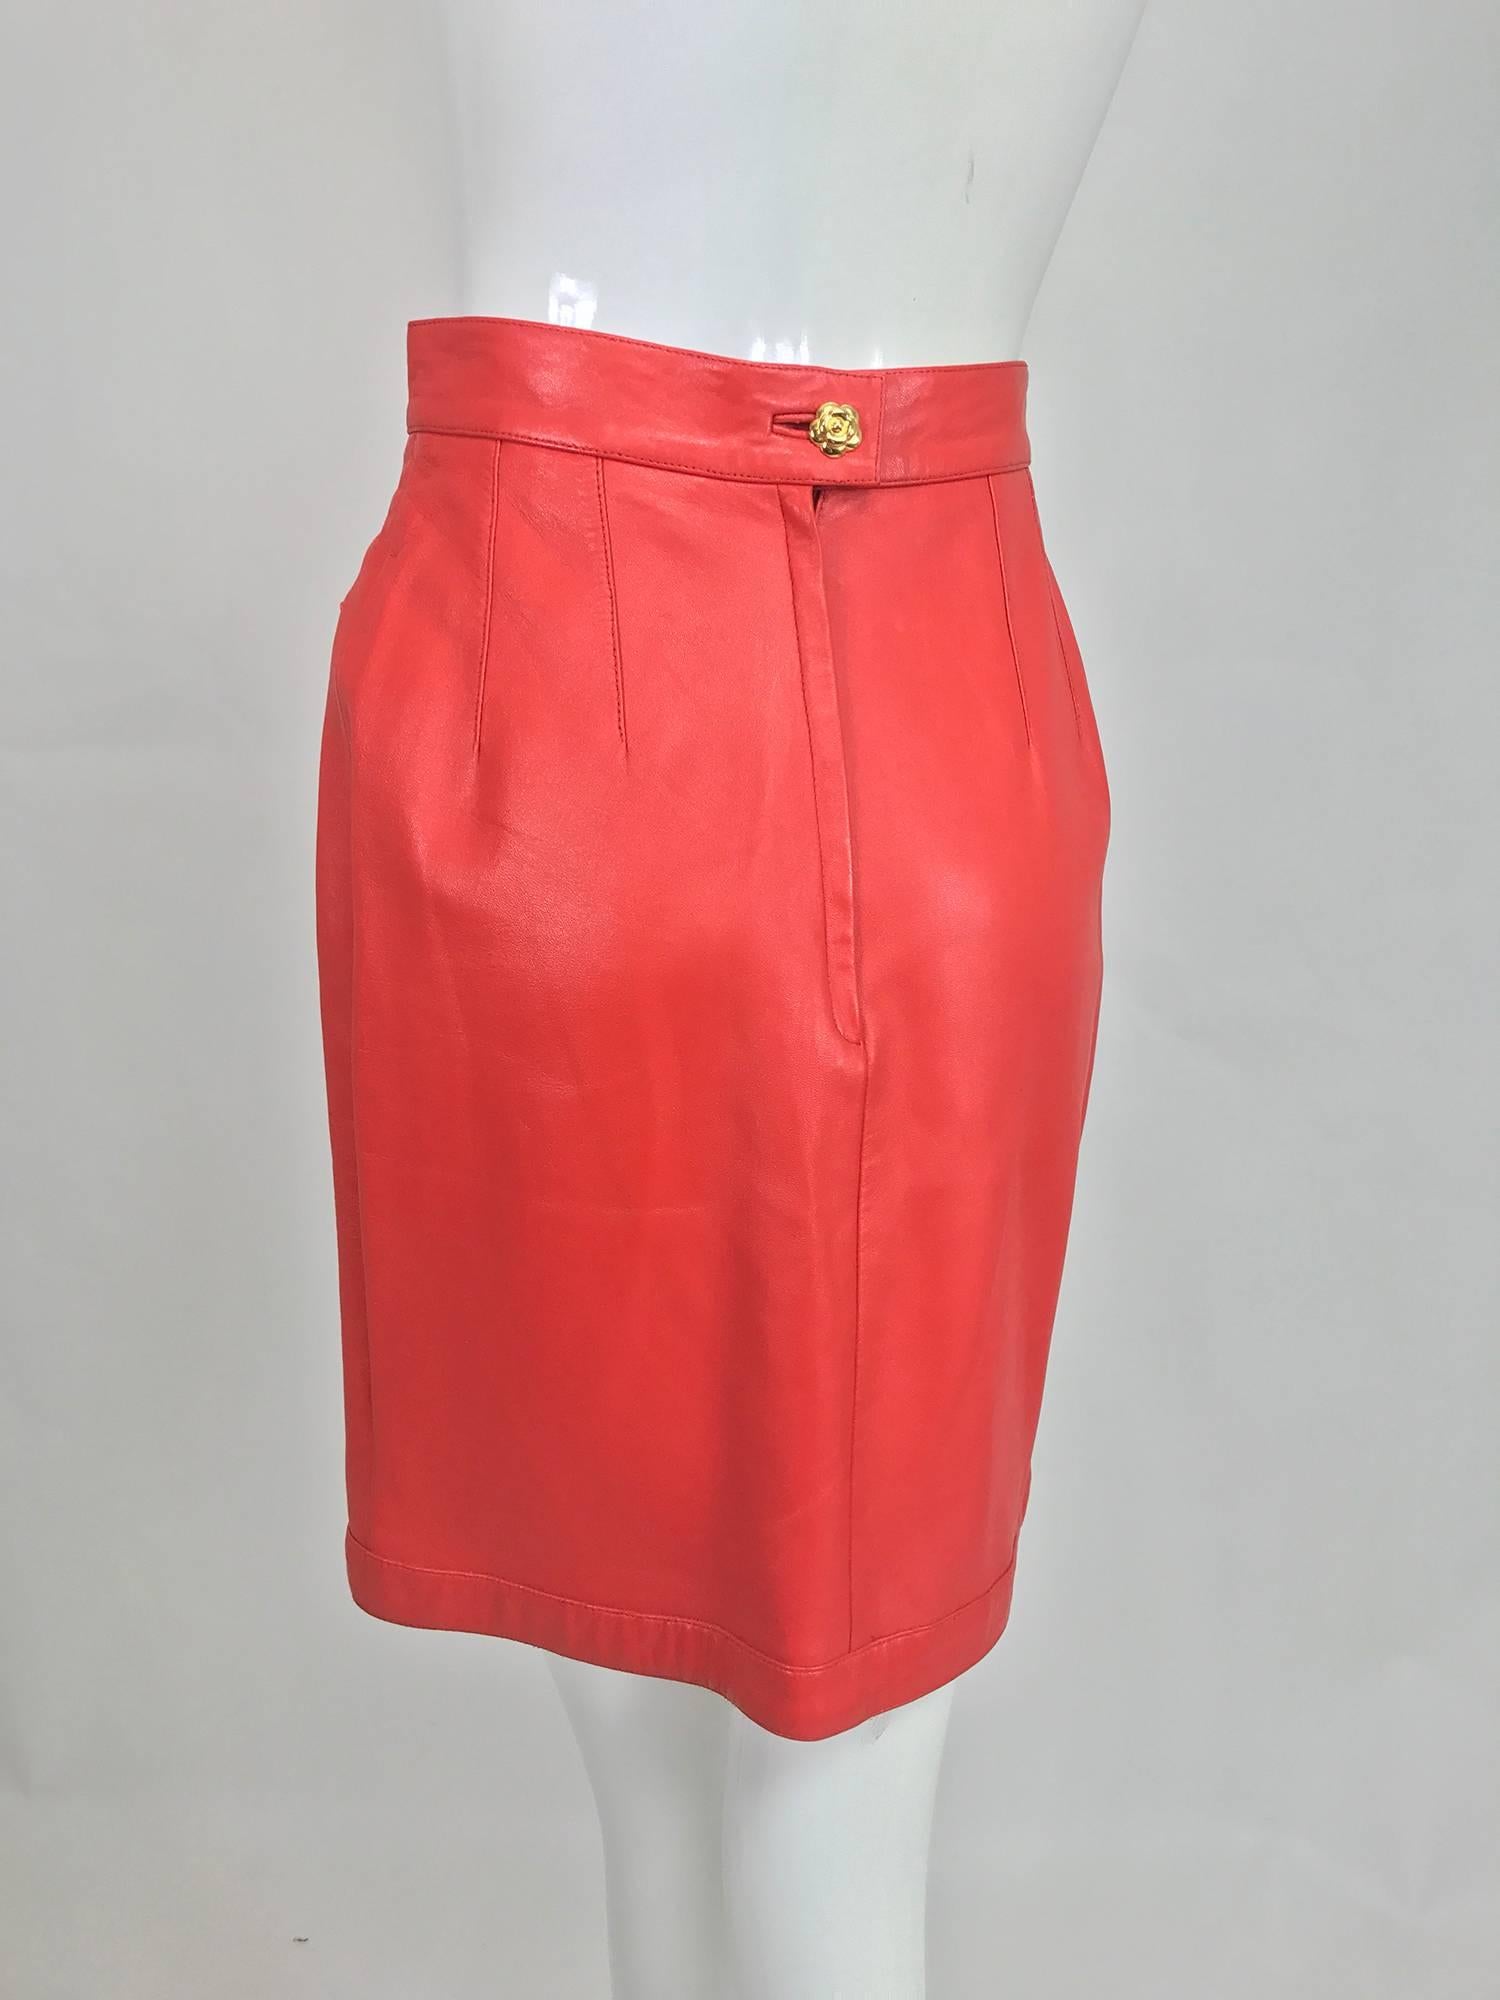 Chanel Vintage 1990s coral red leather skirt with pockets 1